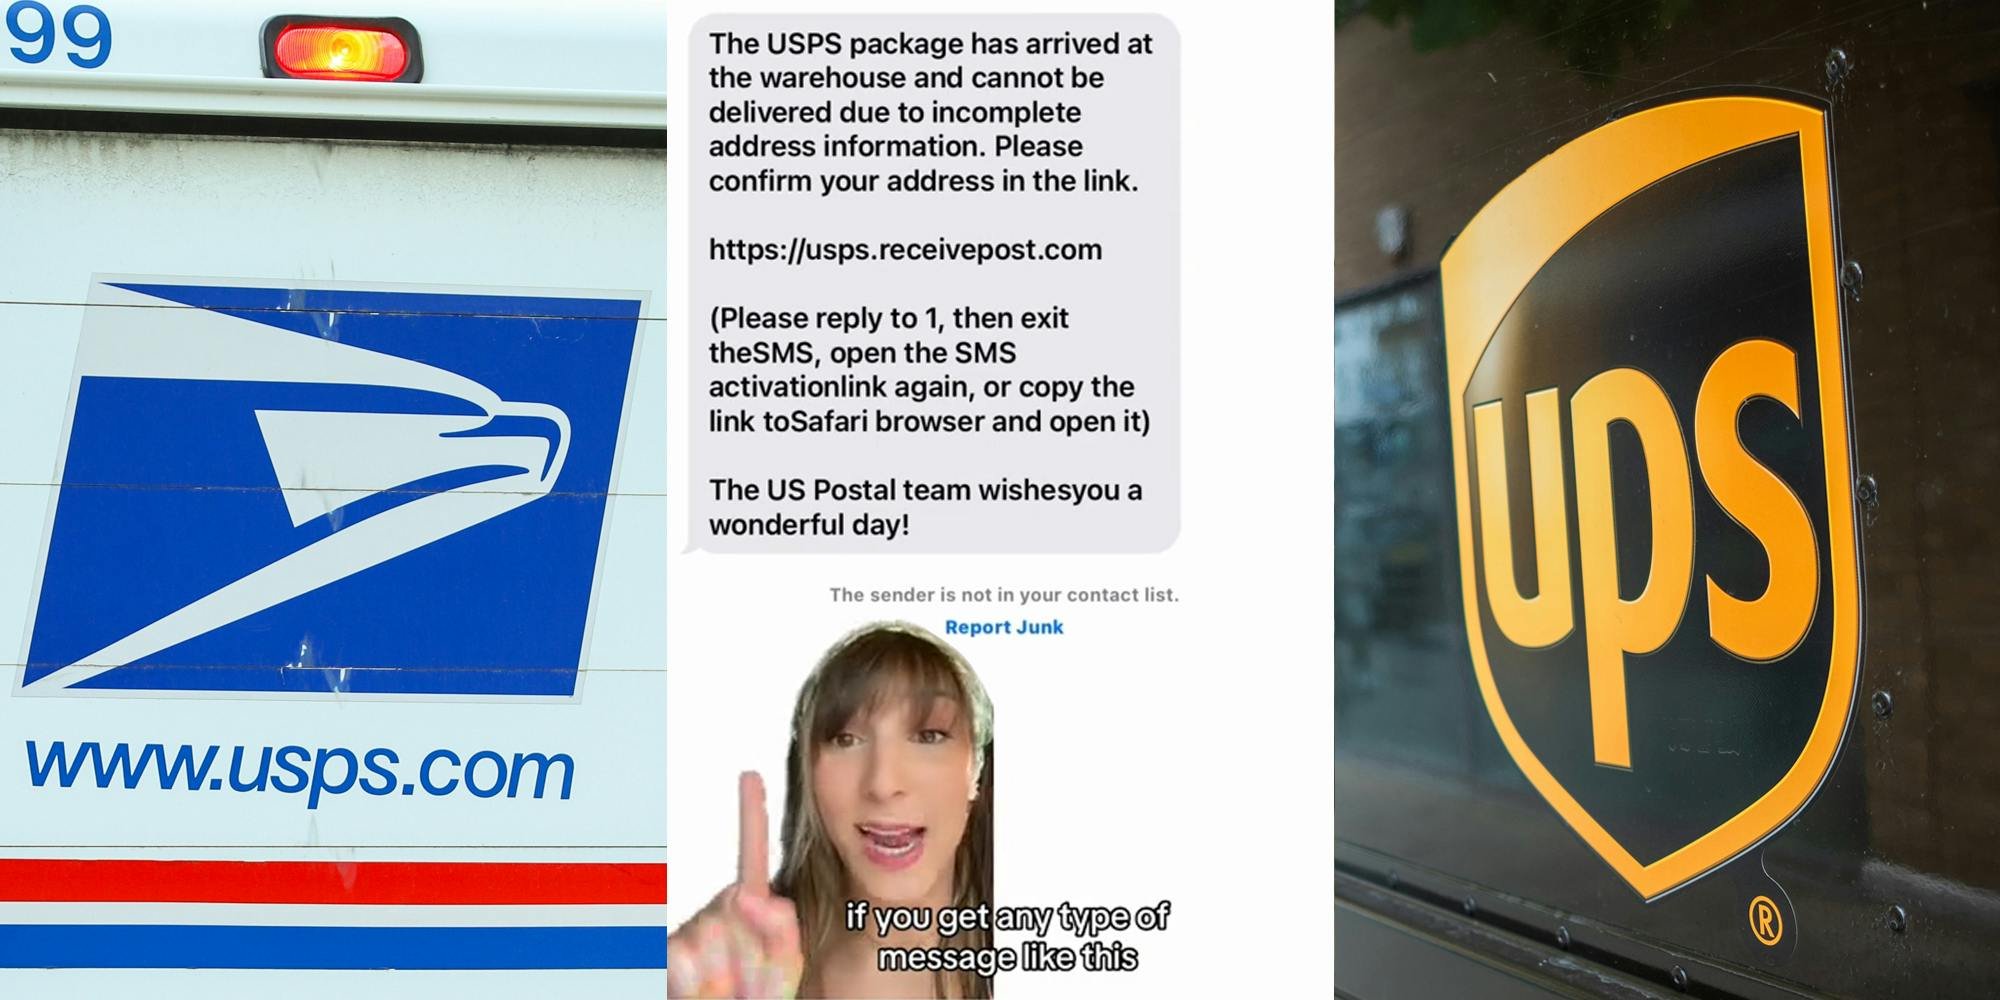 ‘UPS, USPS will never text you’: Customer warns of texts that purportedly come from USPS, UPS